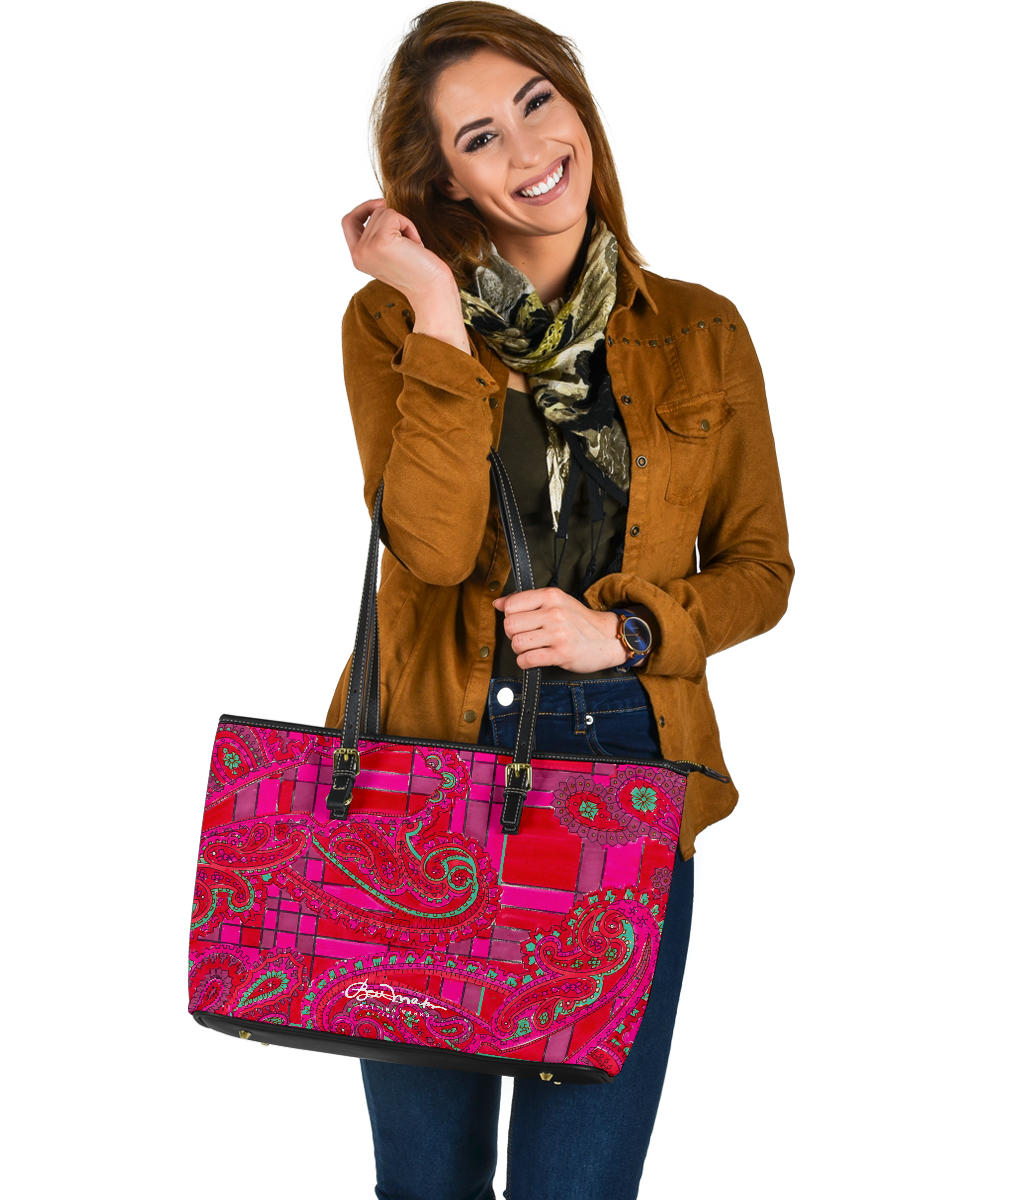 Bright Fuscia and Red Poppy Paisley on Plaid Large Tote Bag